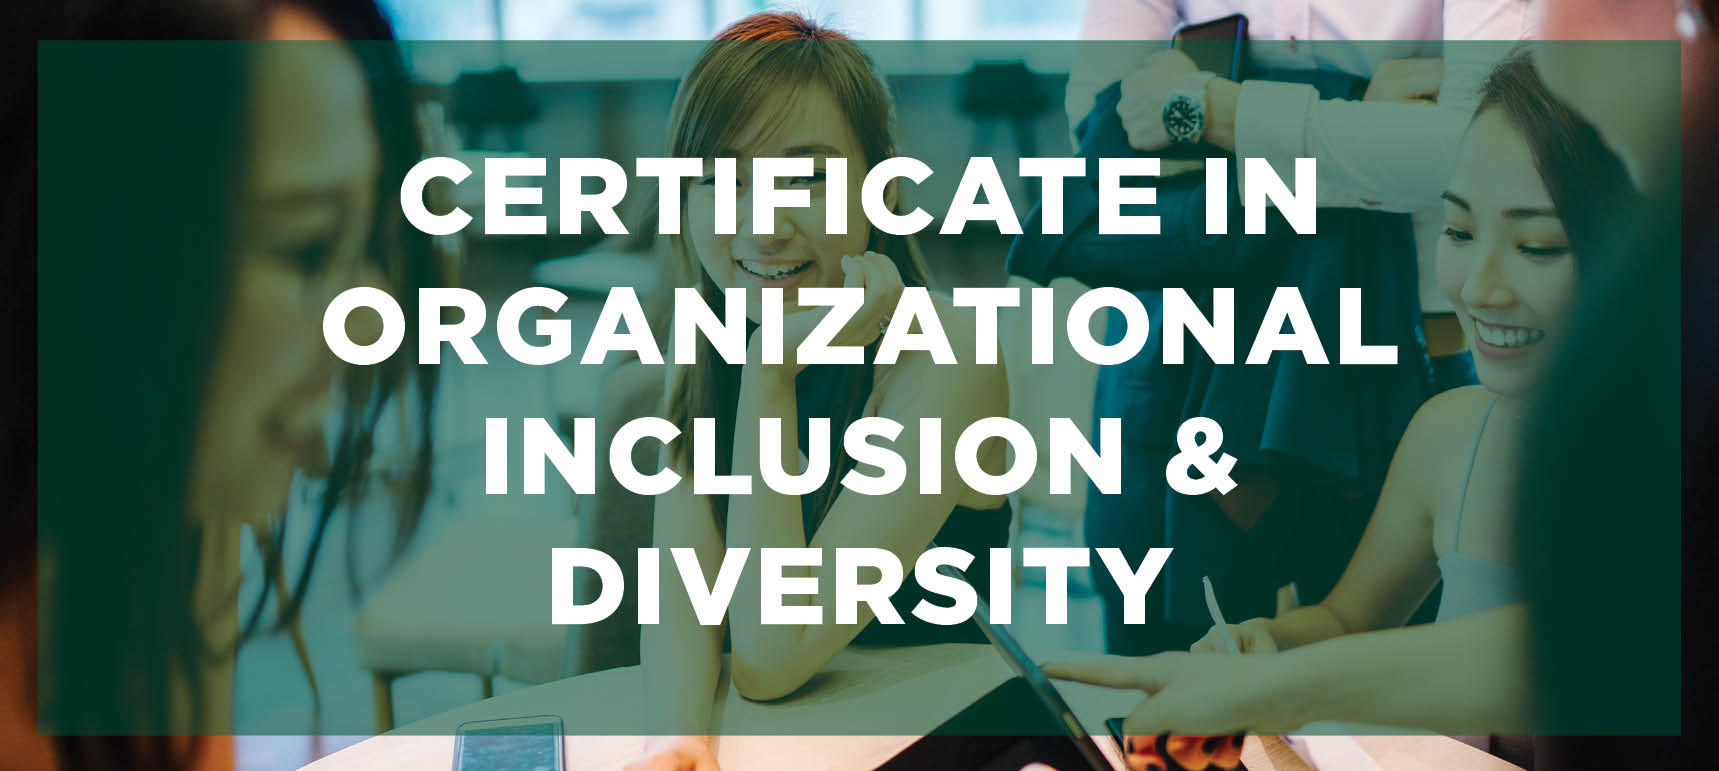 Learn more about the Certificate in Organizational Inclusion & Diversity program